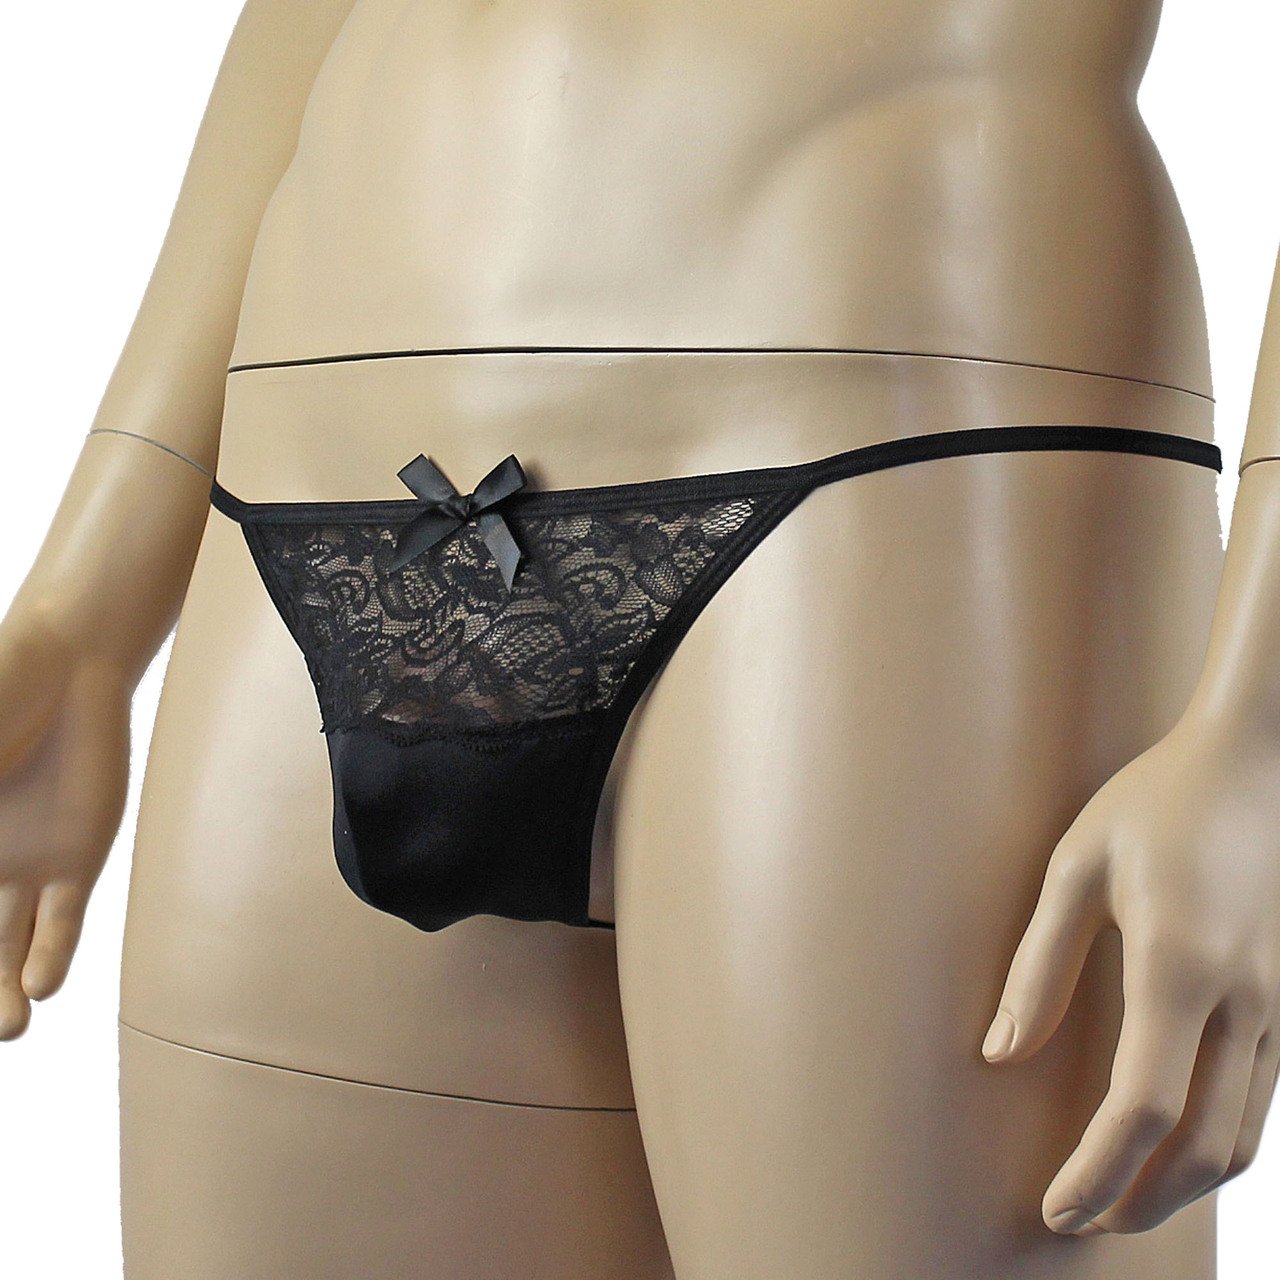 Mens Glamour Bra Top and Pouch G string with Lace Trim (black plus other colours)